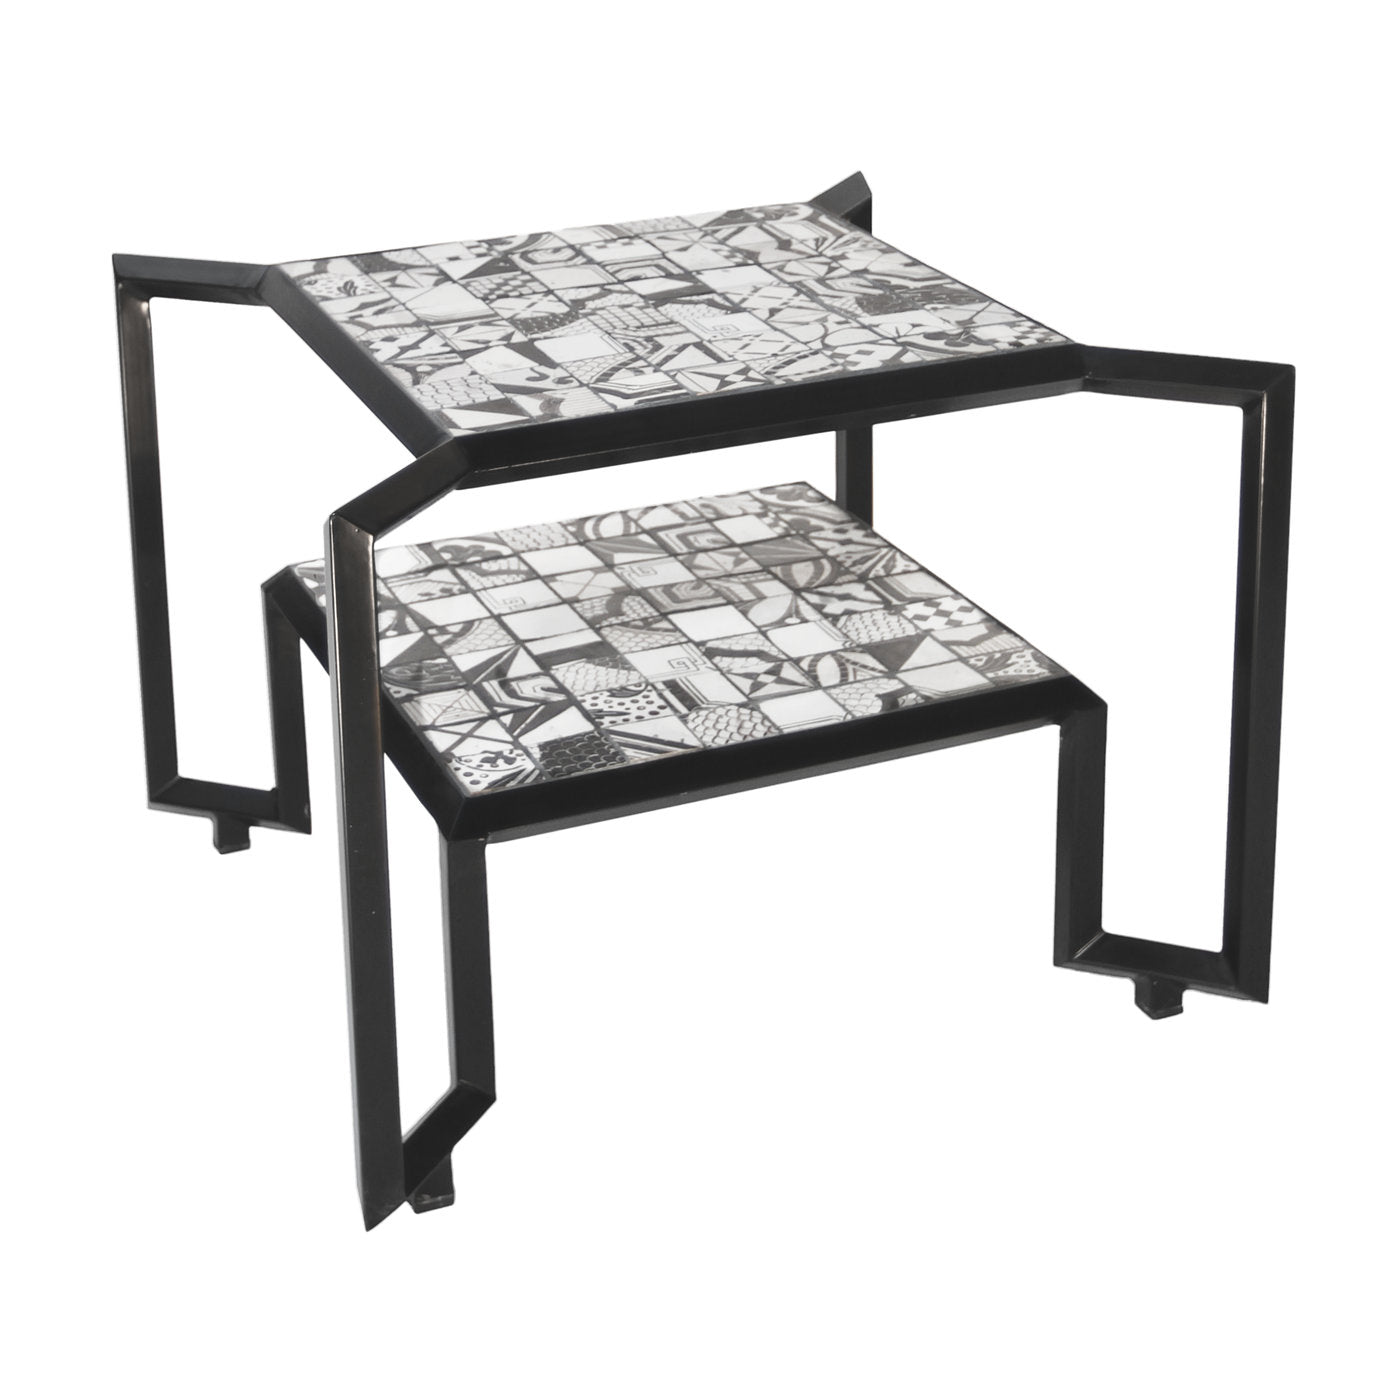 Black and White Spider Mosaic Tile Table - Alternative view 3